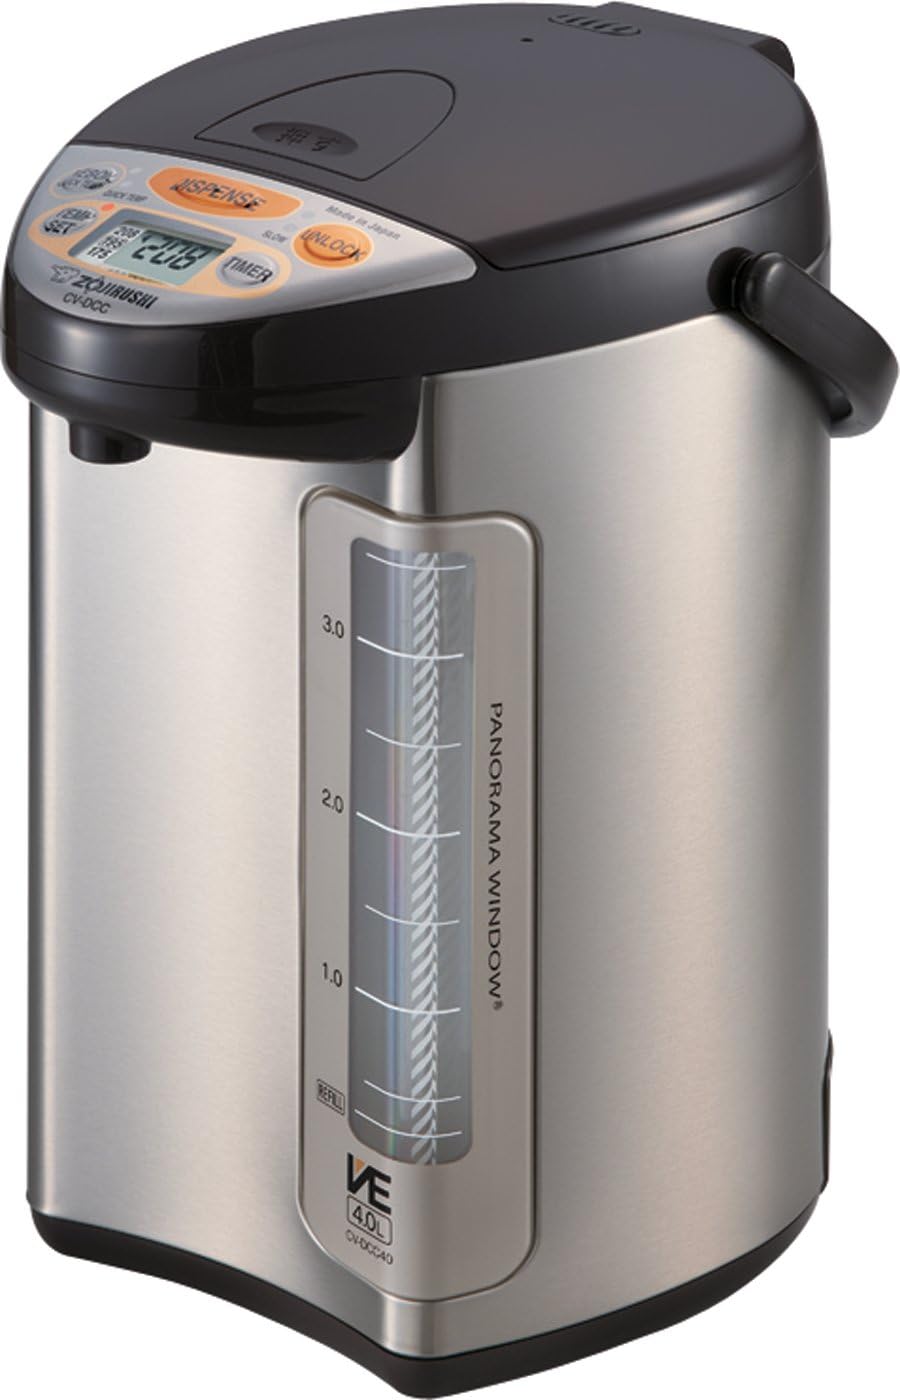 4.0L Water Boiler and Warmer